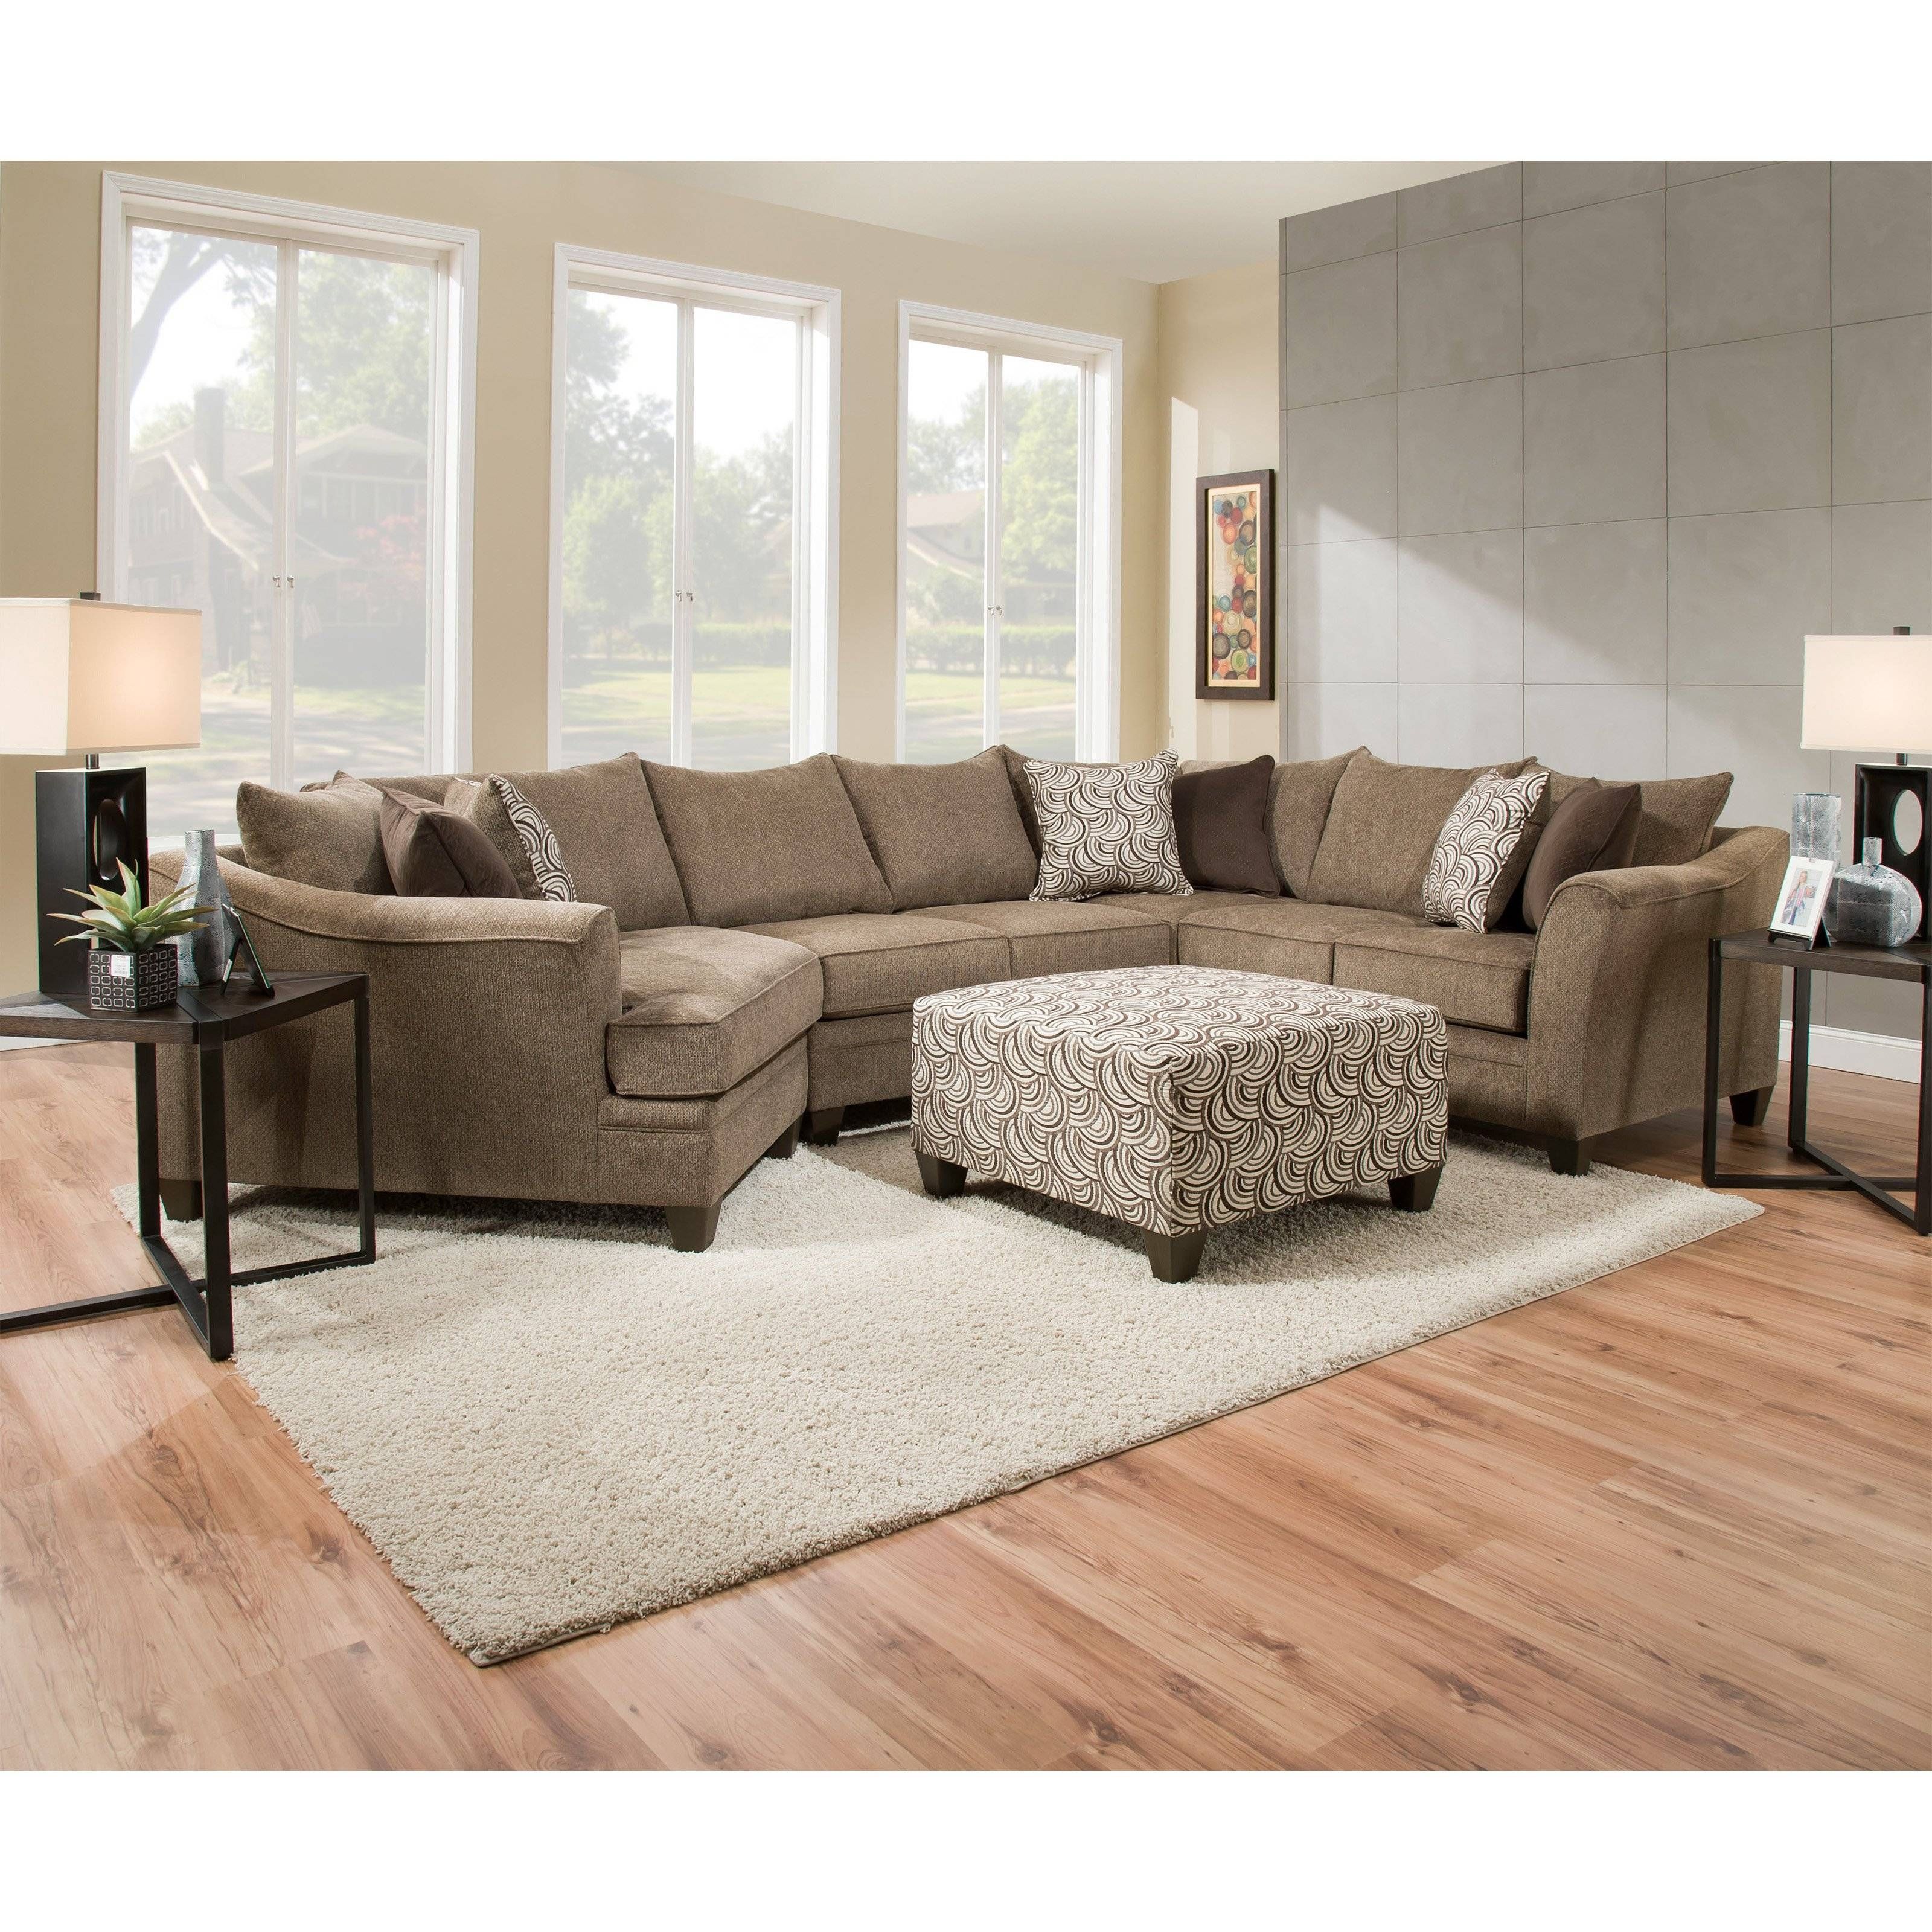 Simmons Upholstery Albany Pewter Sectional | Hayneedle Within Simmons Sectional Sofas (View 24 of 30)